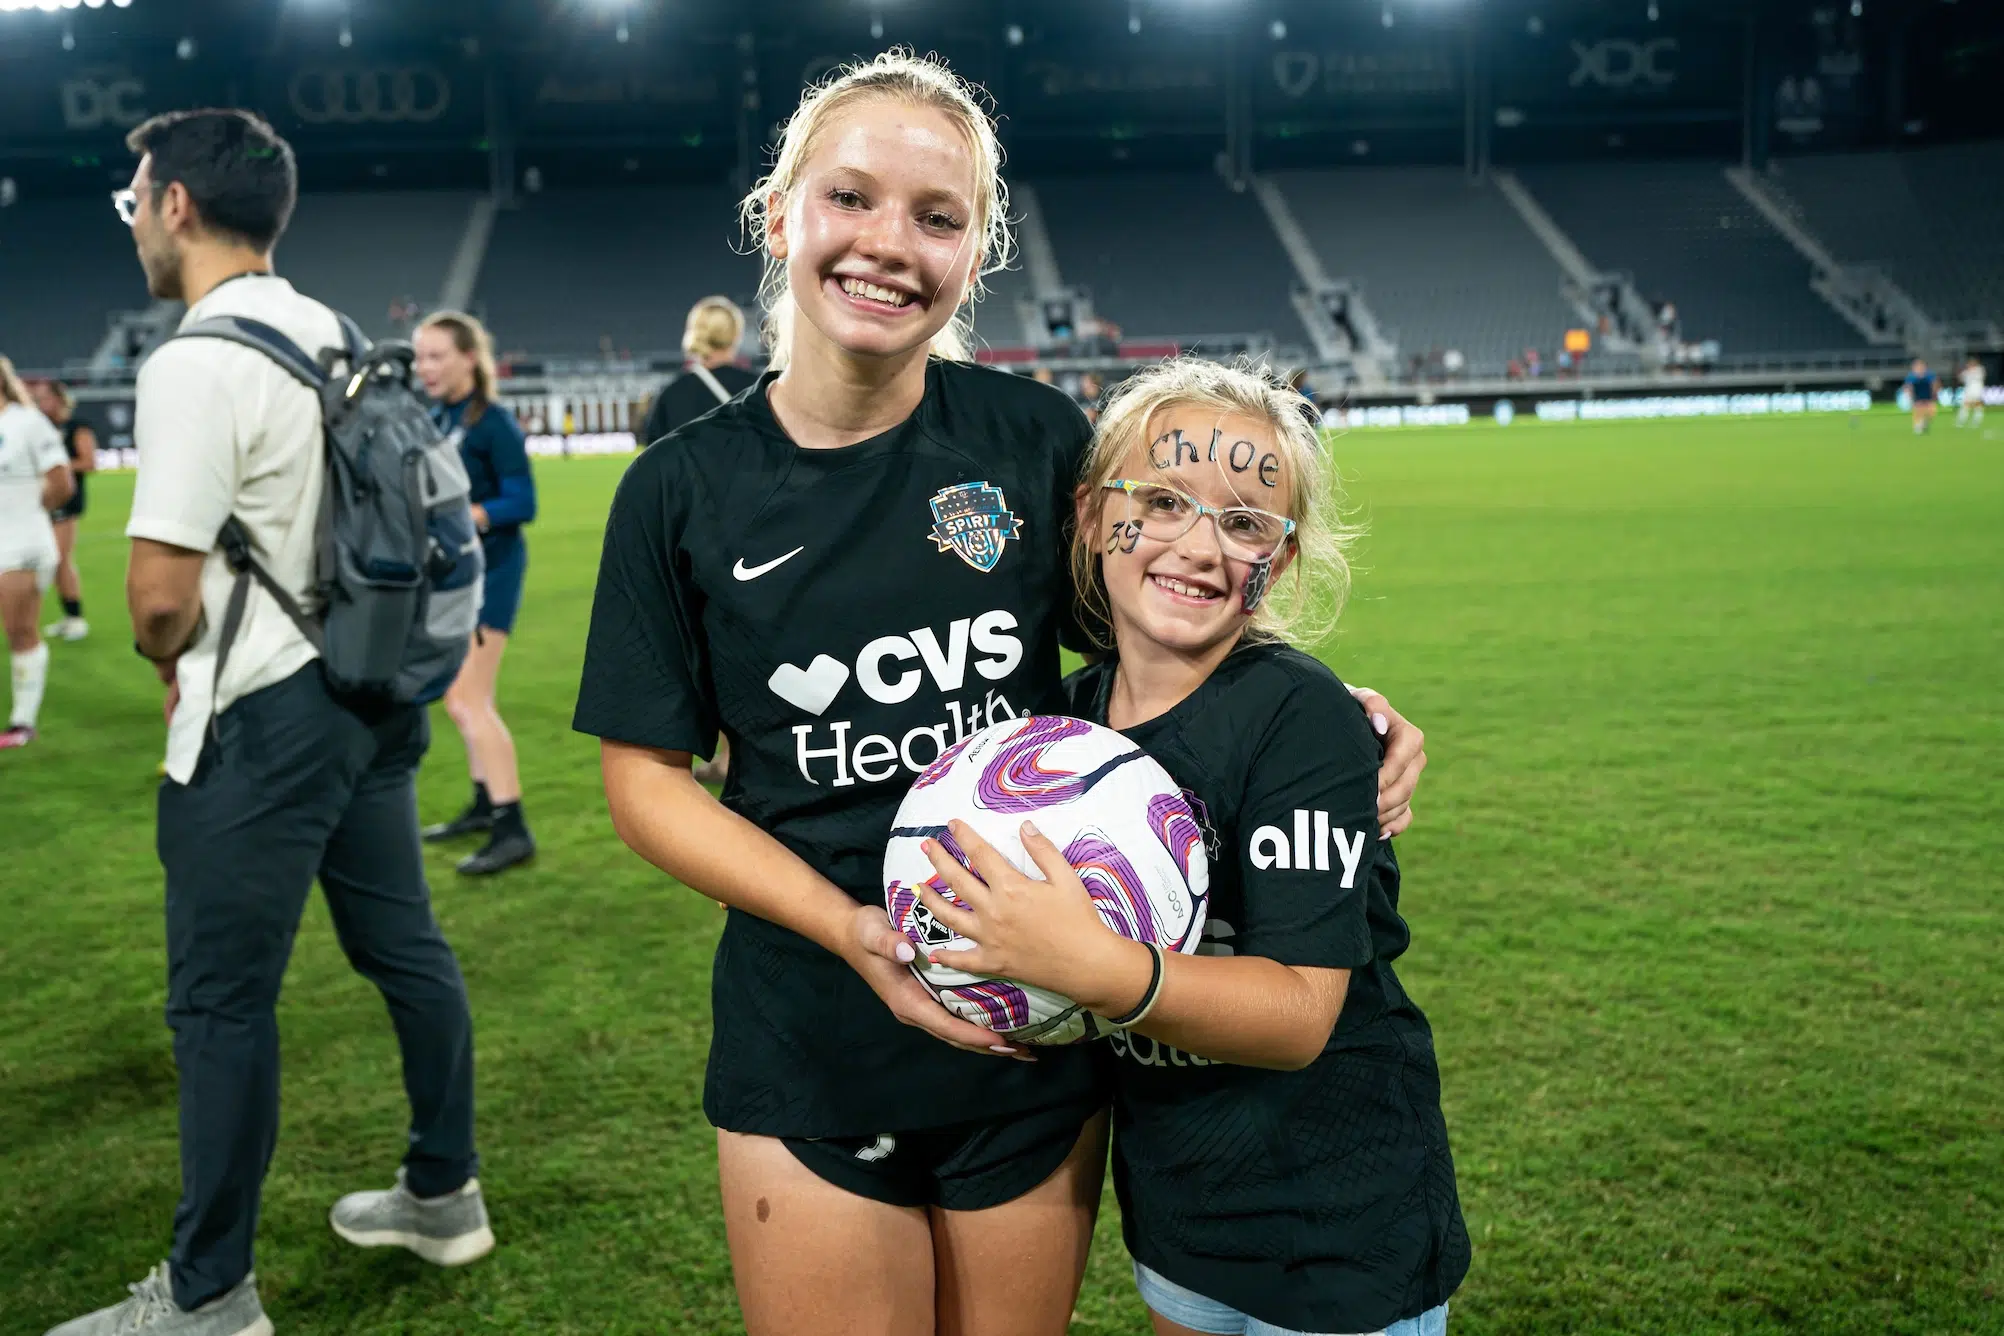 Chloe Ricketts in an all black uniform side hugs a younger child in a Ricketts jersey as the two hold a soccer ball together.